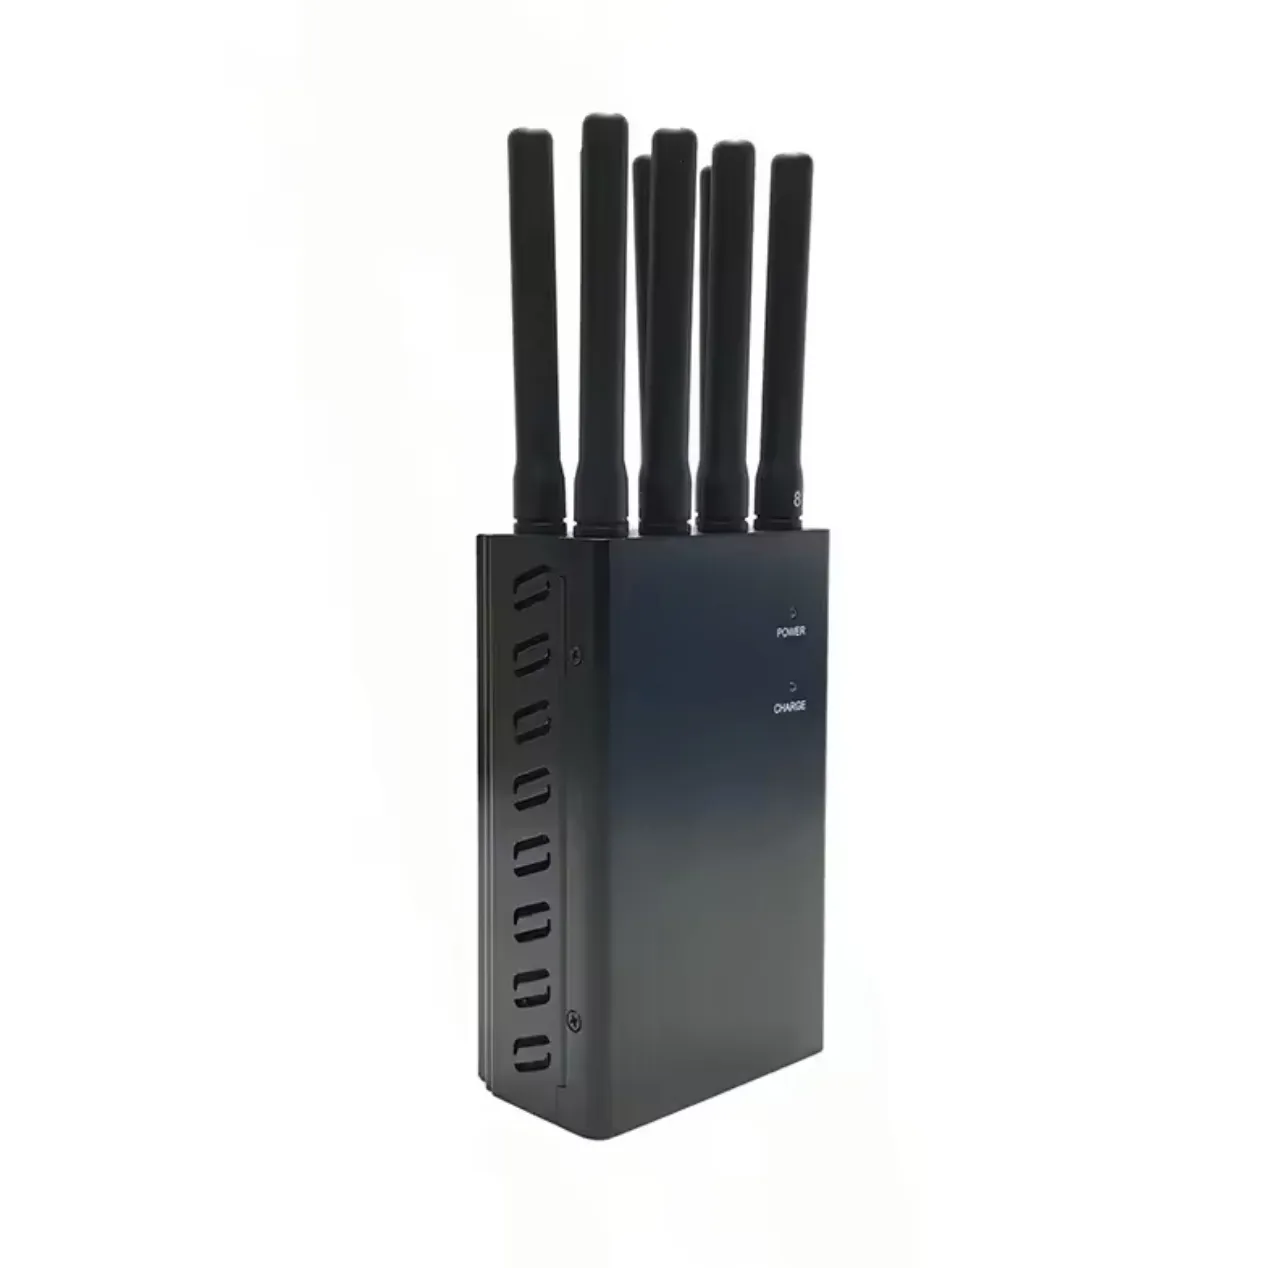 S8 Portable 8 Antennas Signal Blocking 2G 3G 4G Mobile Phone GPS GSM WIFI Signal Booster Anti-Spy Device RF Repeater